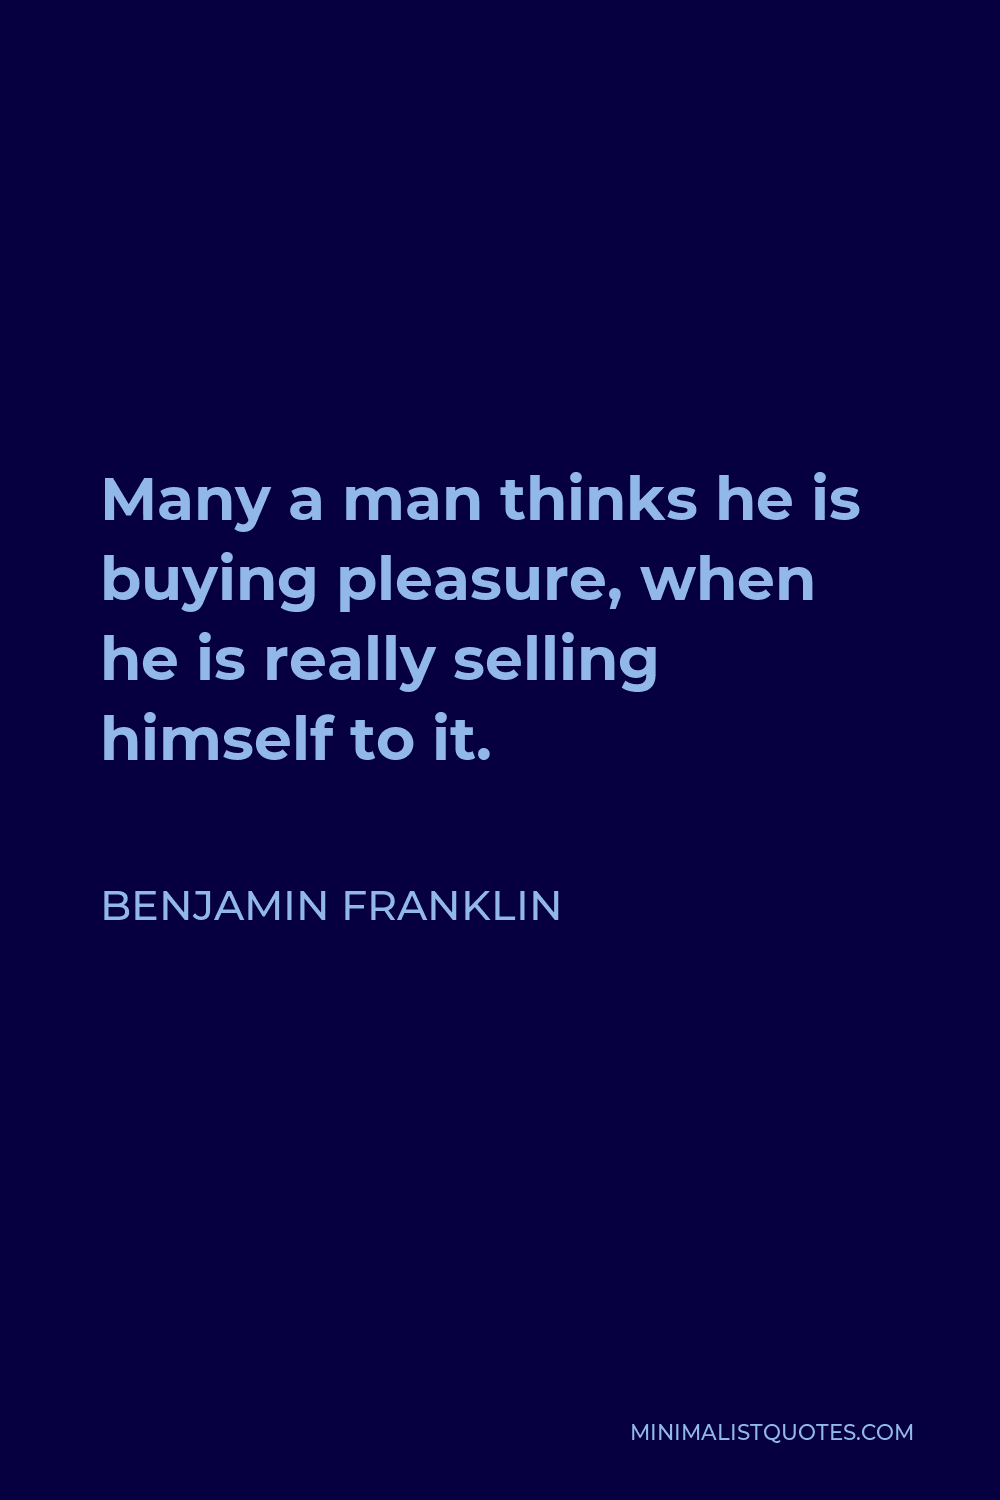 Benjamin Franklin Quote - Many a man thinks he is buying pleasure, when he is really selling himself to it.